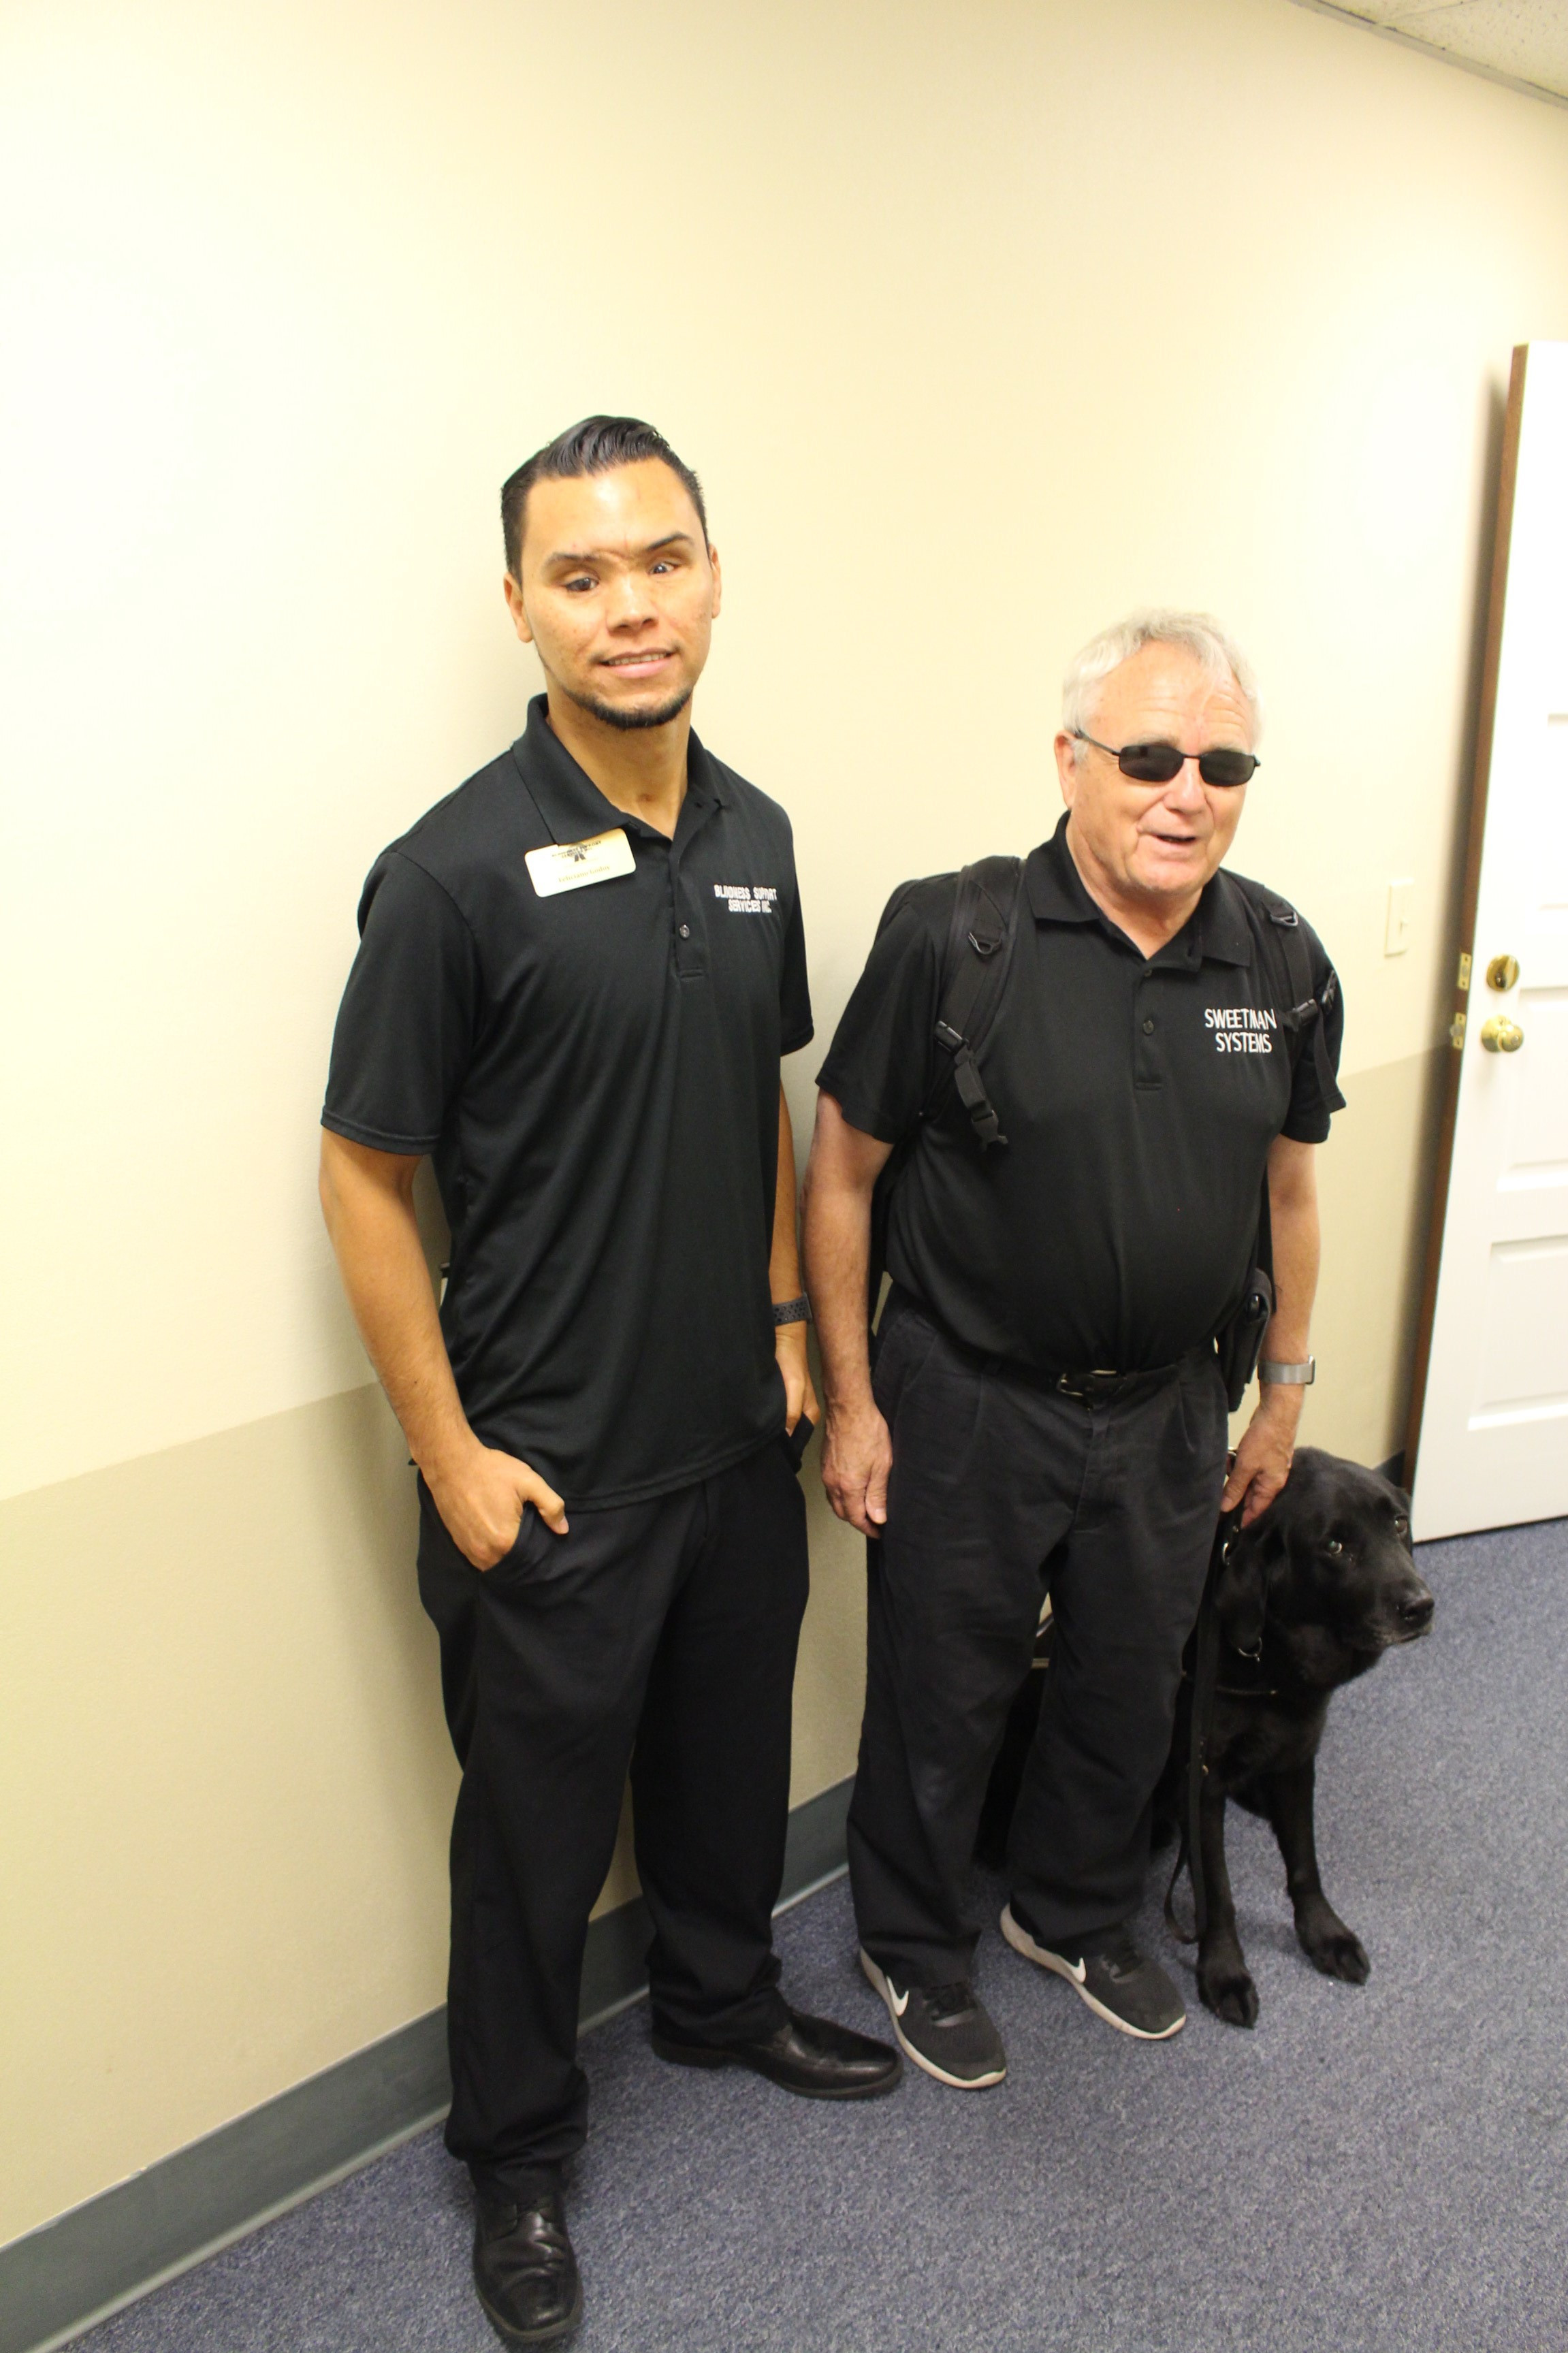 Feliciano, Assistive technology specialist, and Bob Sweetman standing side by side